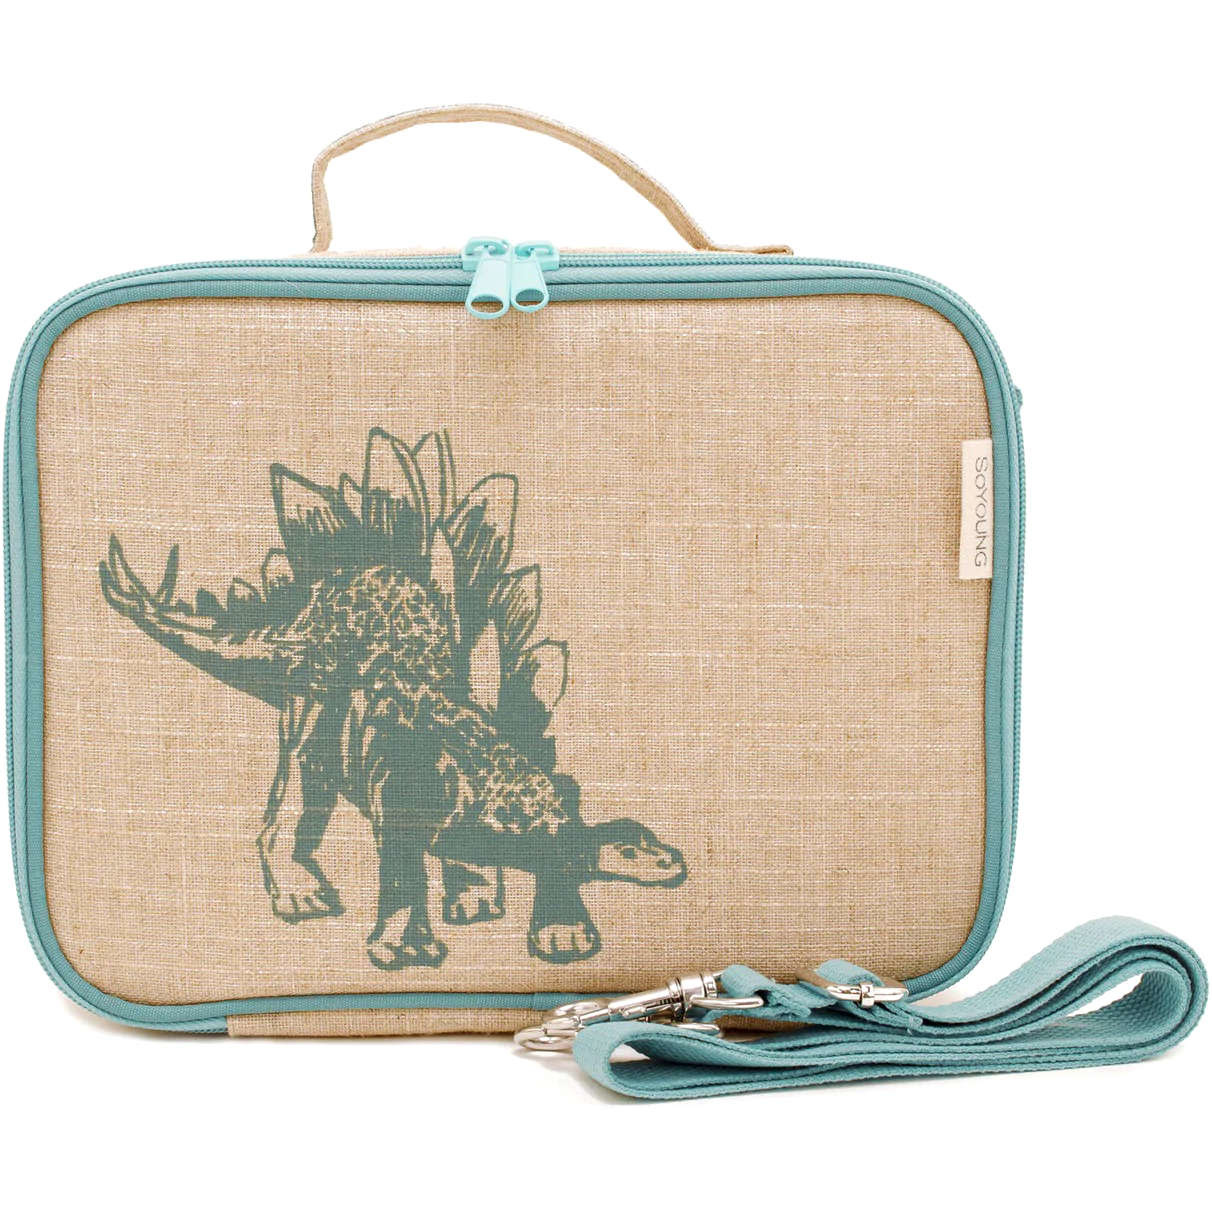 GREEN STEGOSAURUS LUNCH BOX - Land Of Oz Toys and Gifts